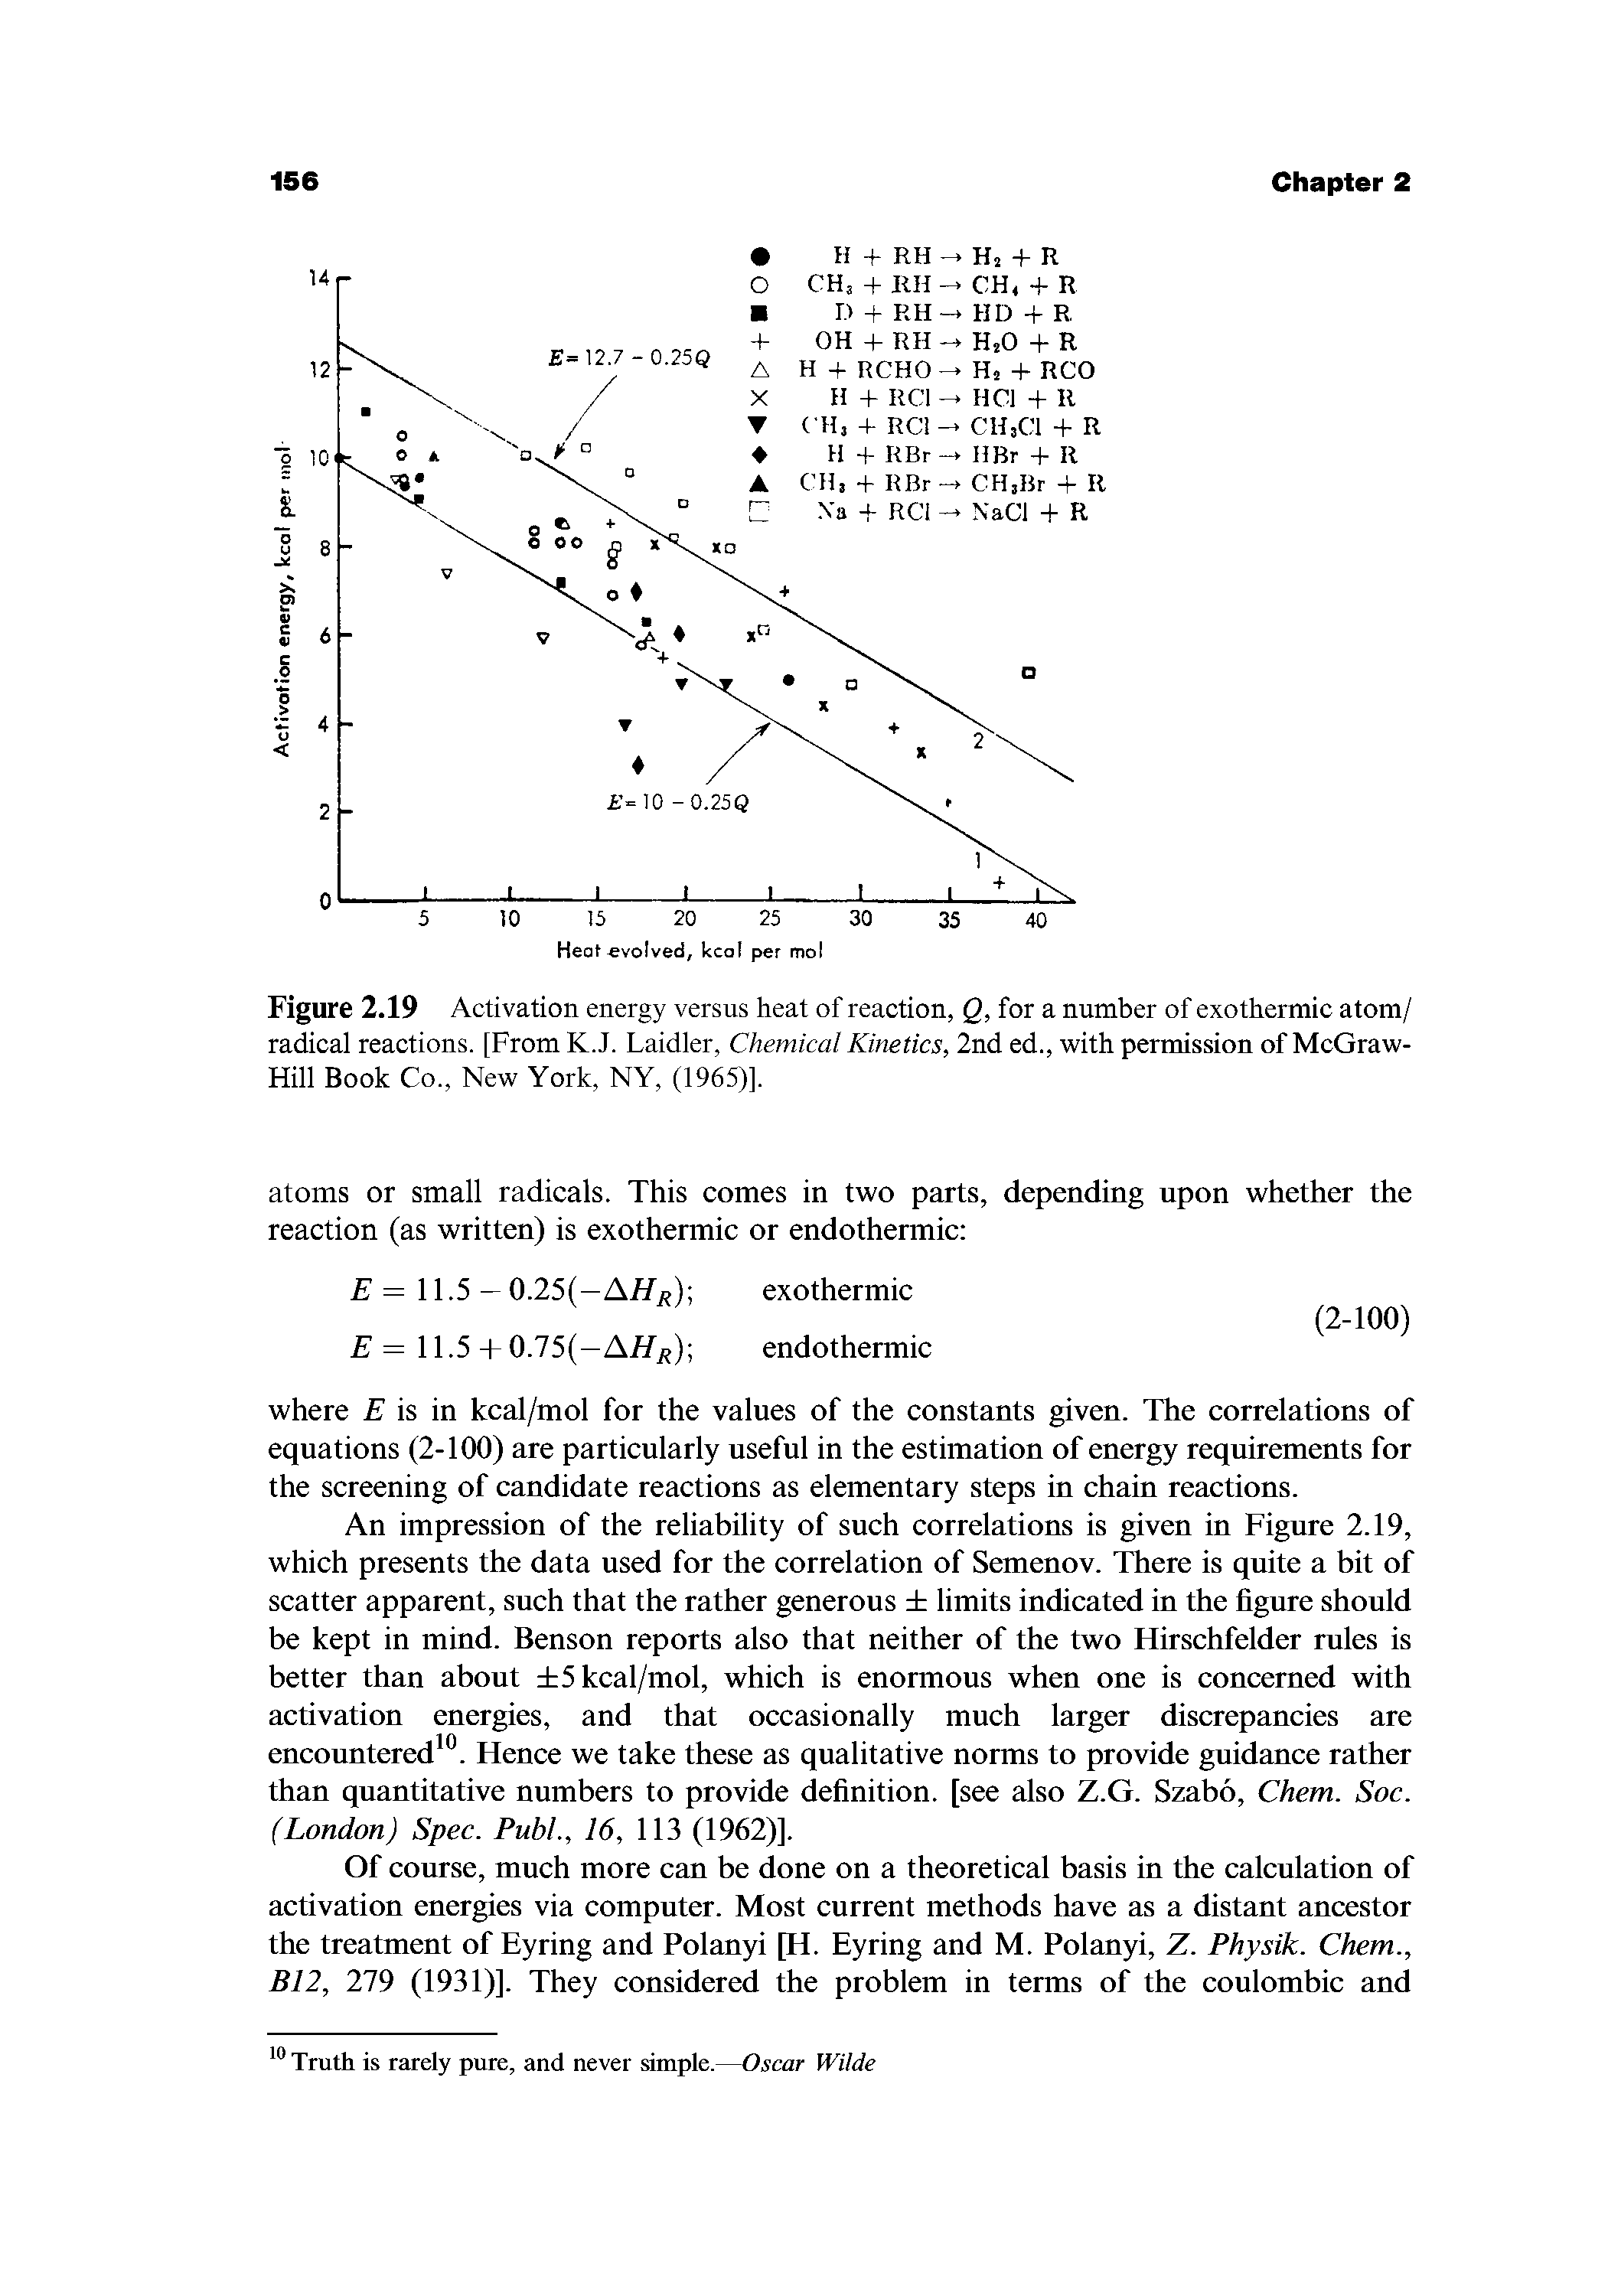 Figure 2.19 Activation energy versus heat of reaction, Q, for a number of exothermic atom/ radical reactions. [From K.J. Laidler, Chemical Kinetics, 2nd ed., with permission of McGraw-Hill Book Co., New York, NY, (1965)].